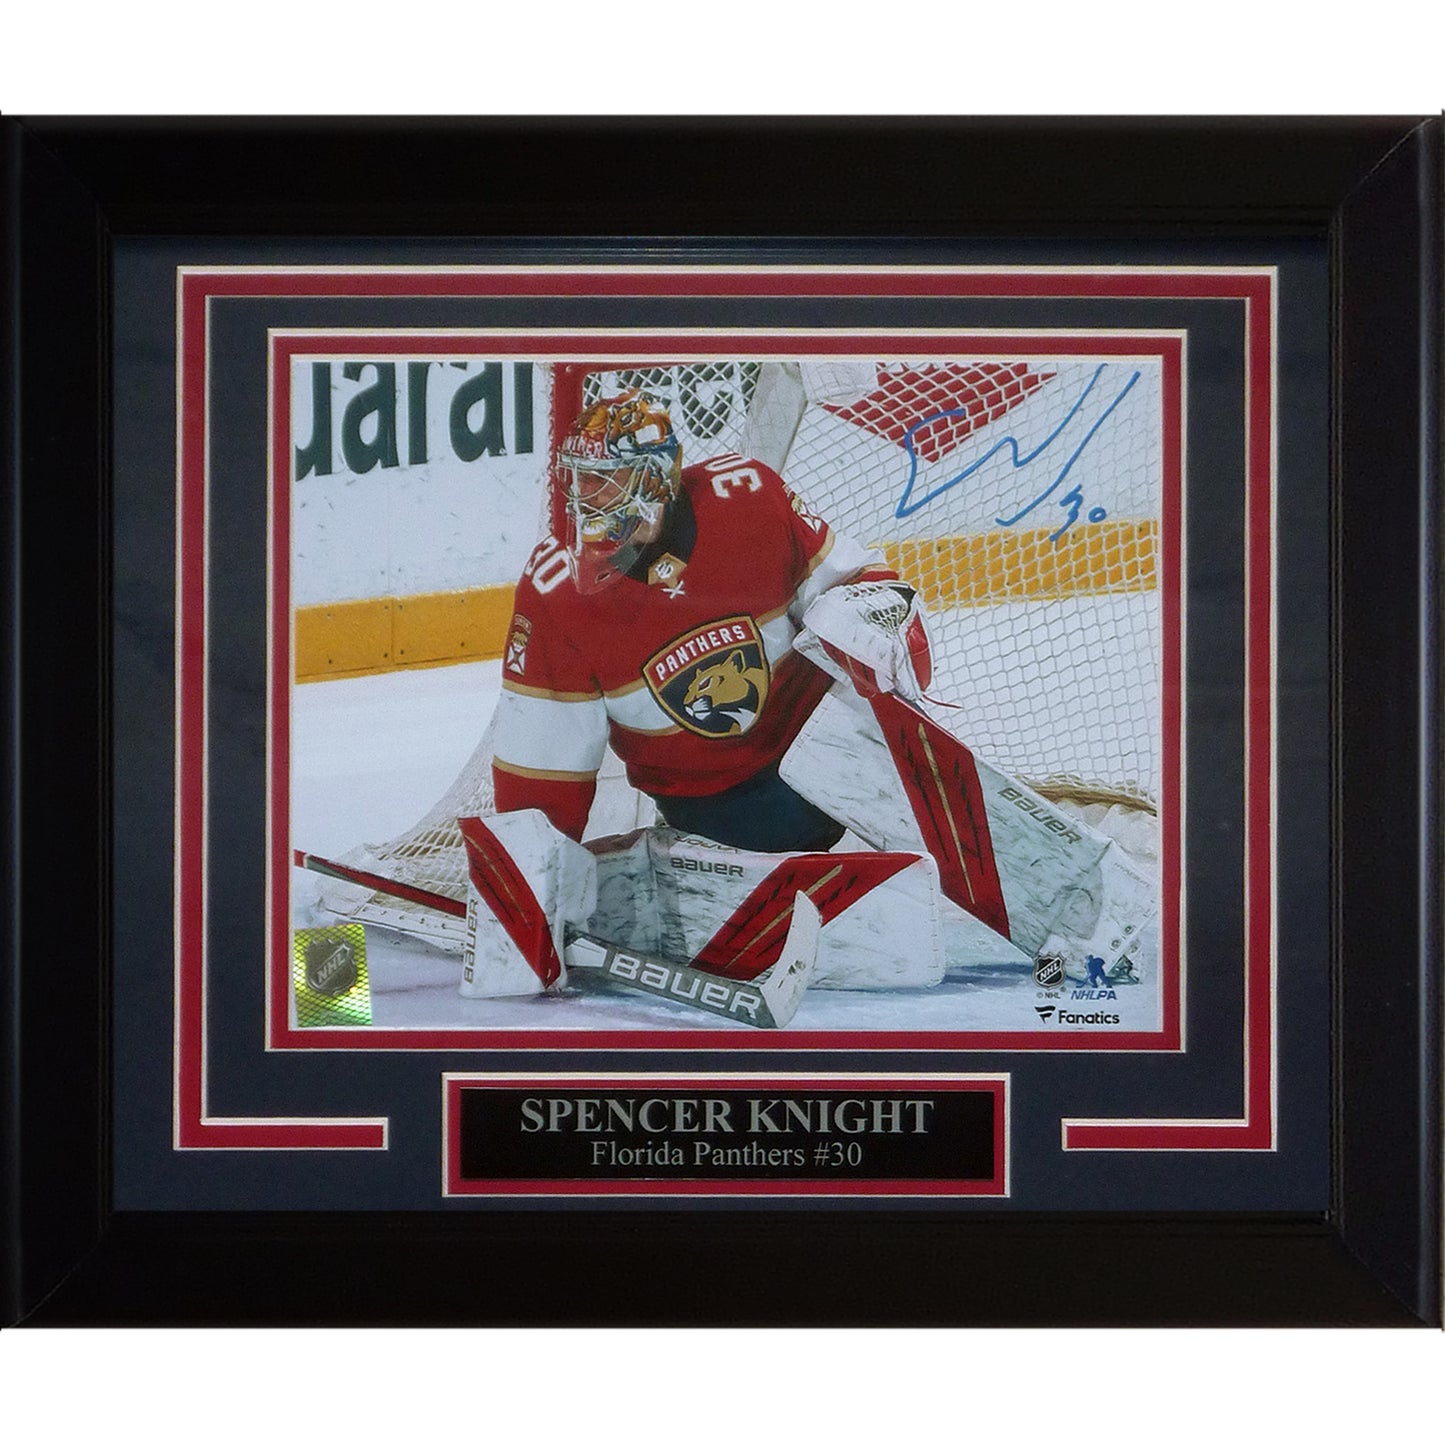 Spencer Knight Autographed Florida Panthers Deluxe Framed 8x10 Photo - Fanatics